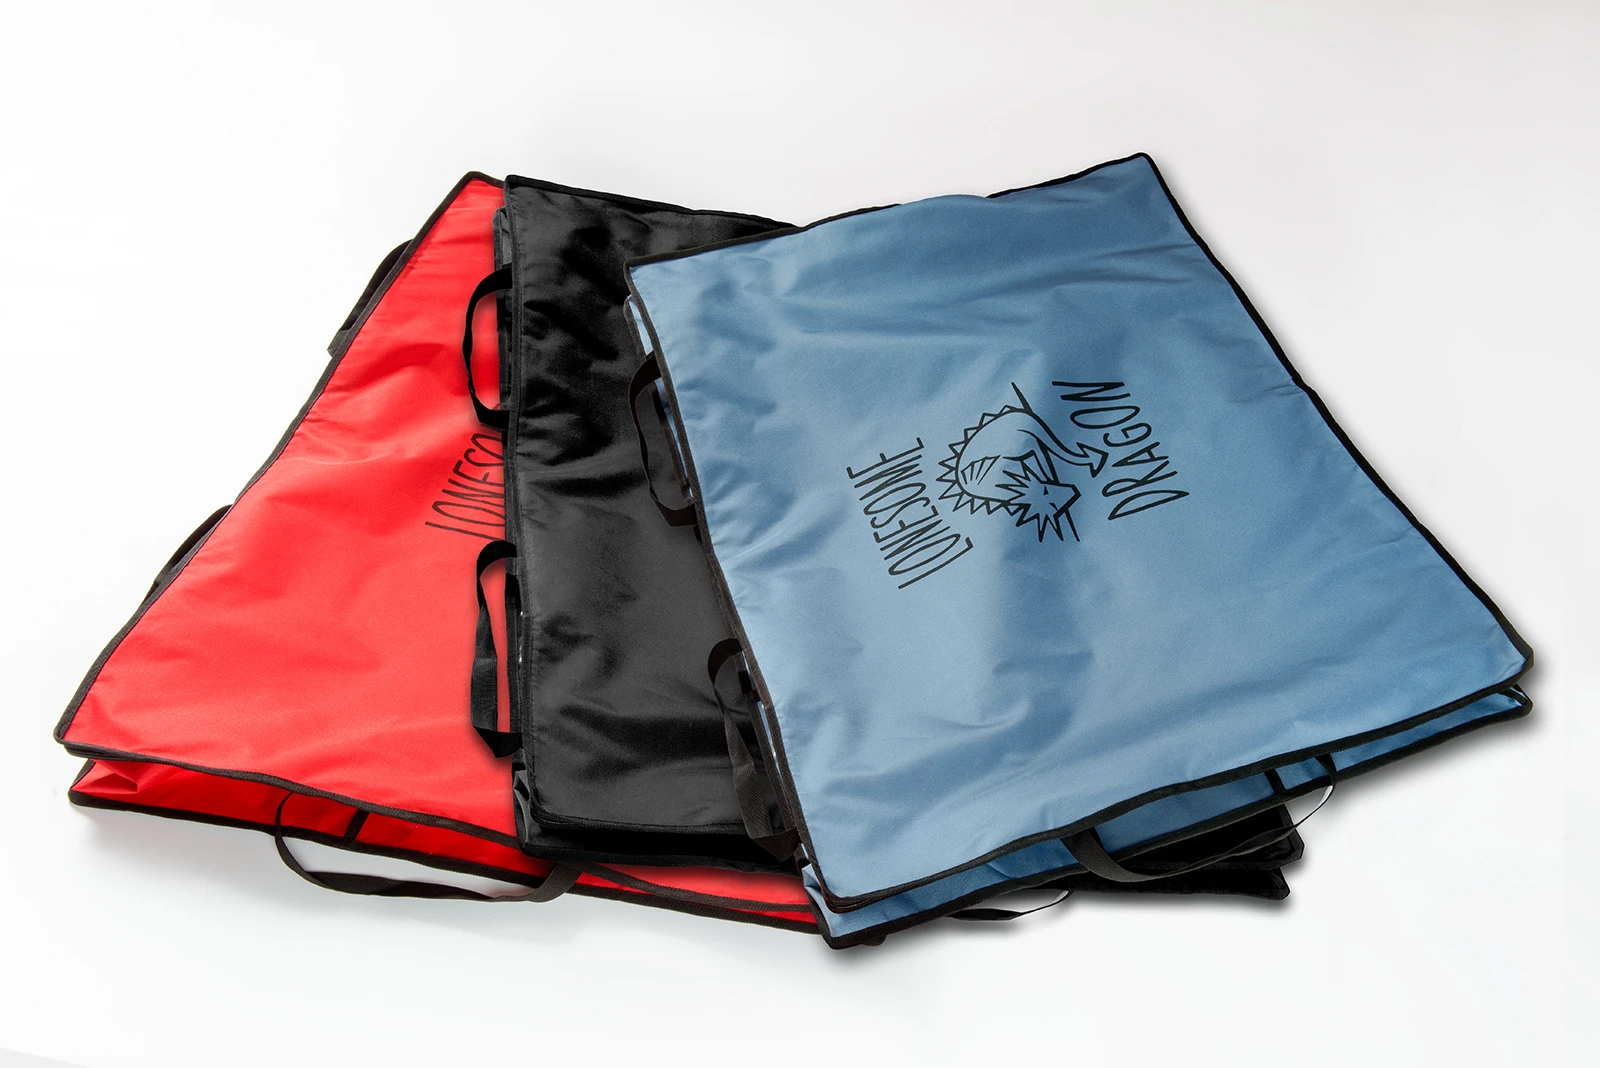 The storage bags for your sex swing in three different colors